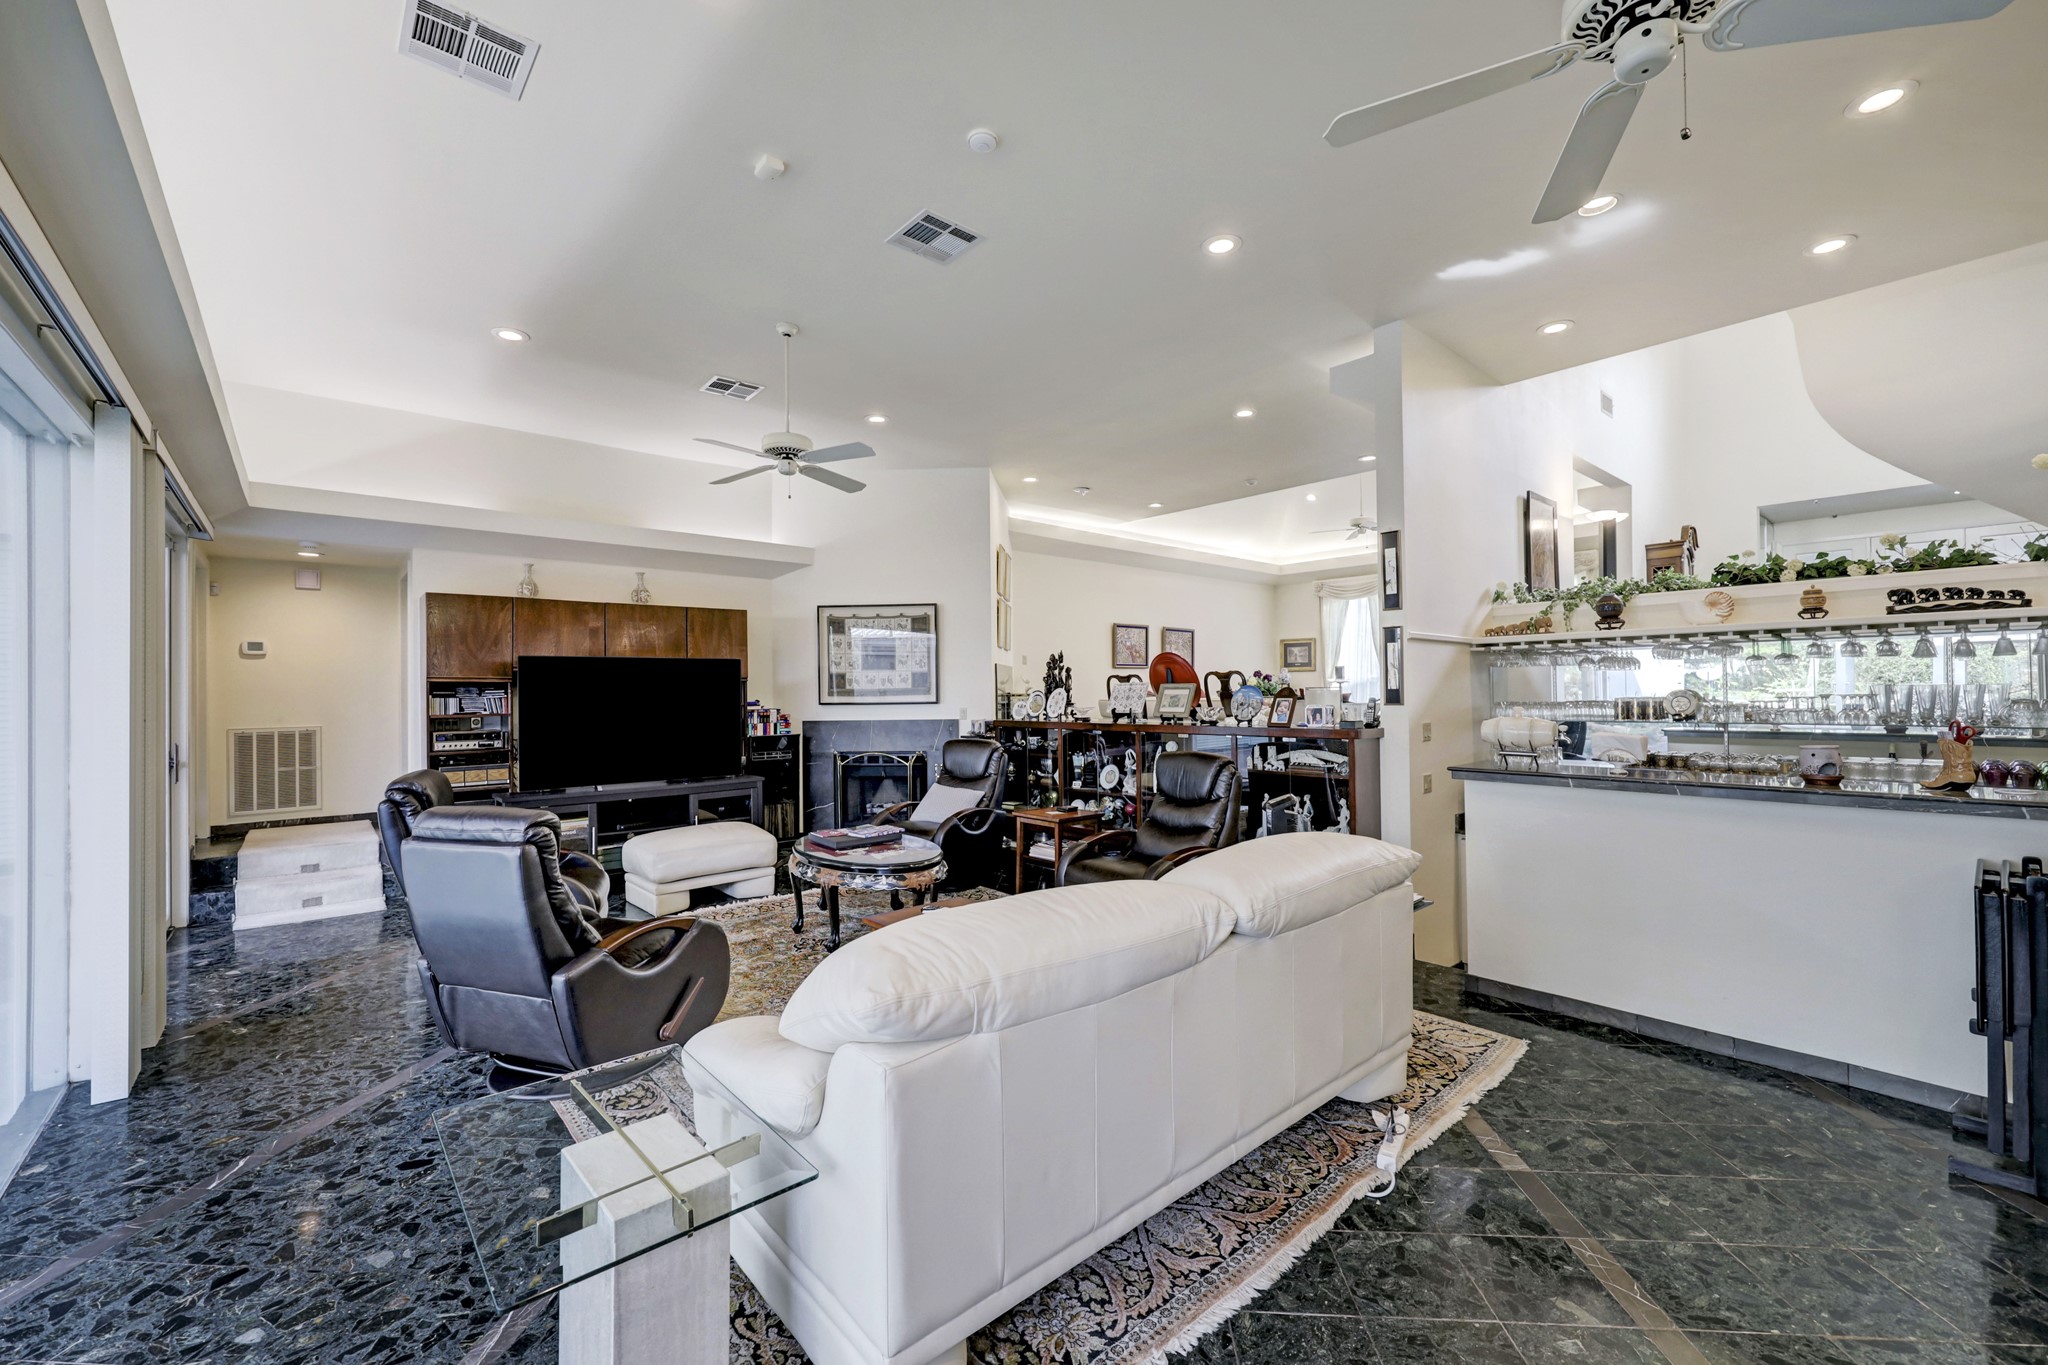 A wetbar with beverage fridge, built-in media cabinets, corner fireplace and views to the living room, kitchen and foyer are features of the massive family room that opens to the pool area. At the far end, steps lead to the primary suite and an ensuite bedroom.